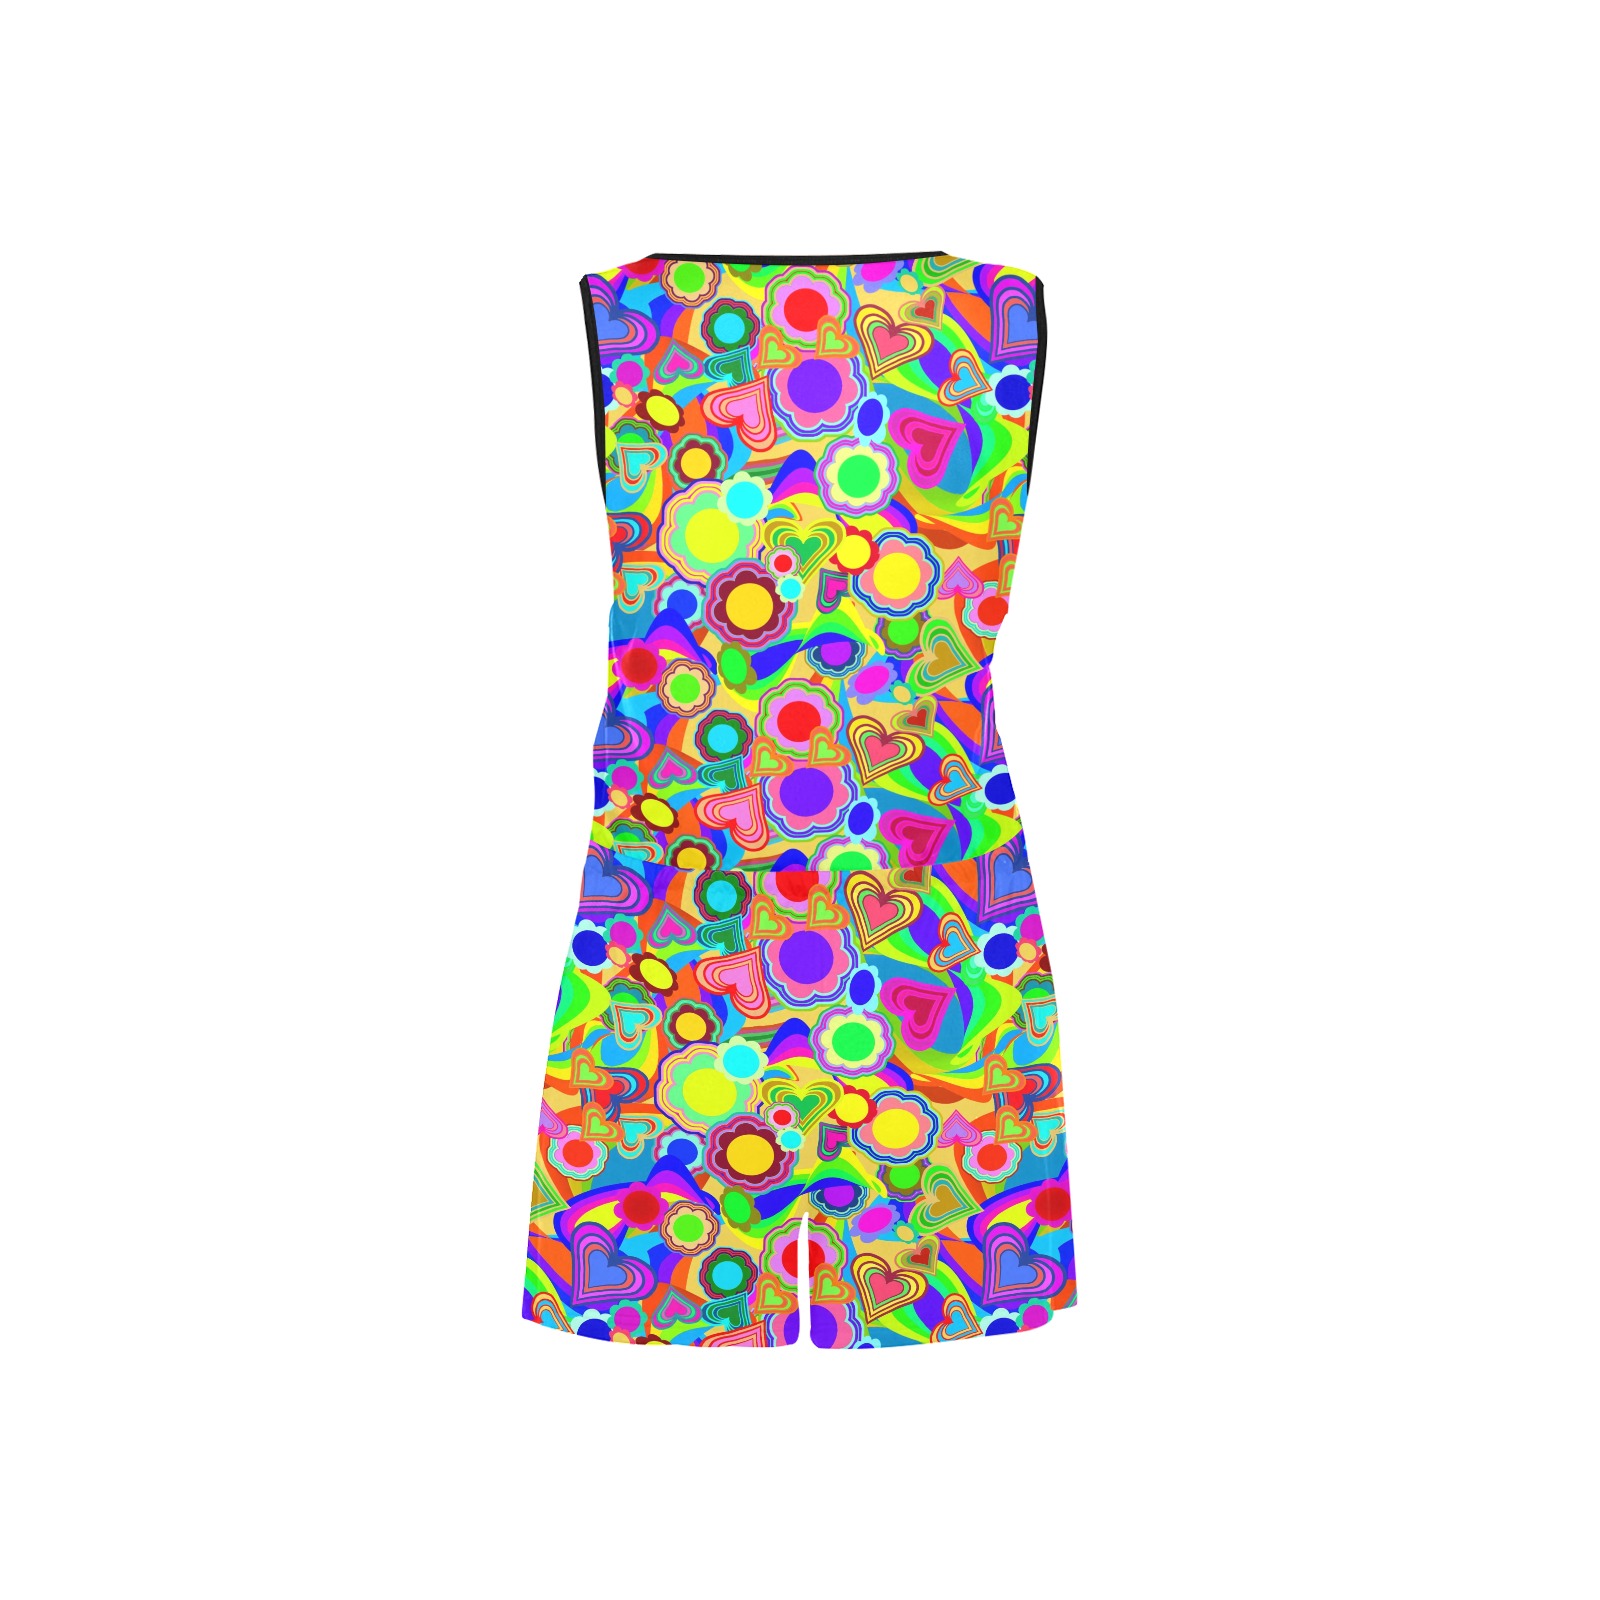 Groovy Hearts and Flowers All Over Print Short Jumpsuit